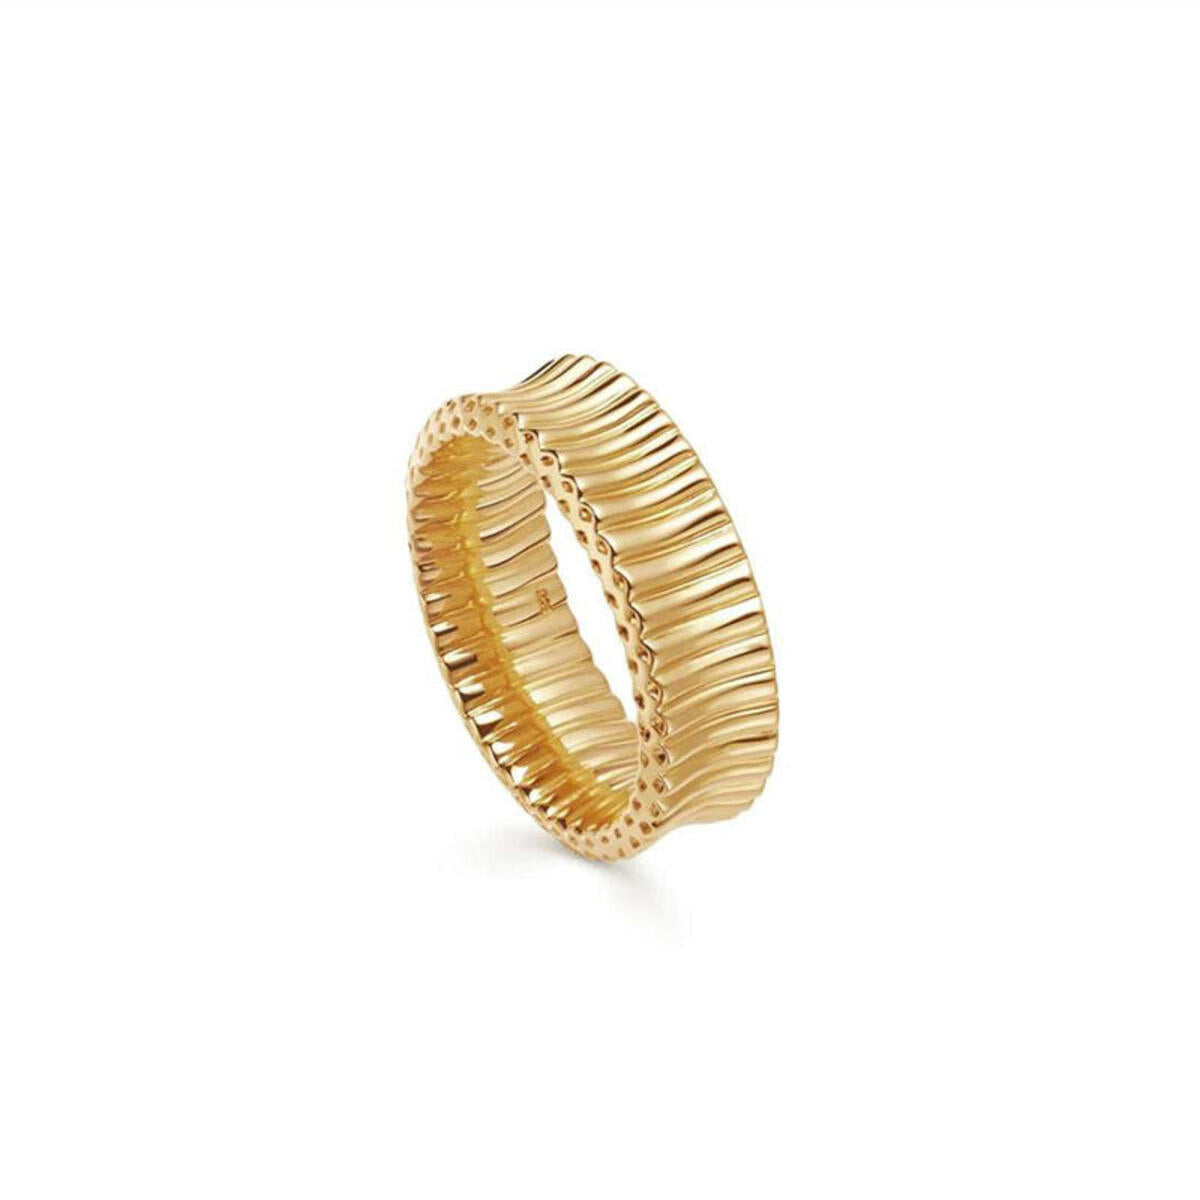 Roman Gold Ring. By ALCO.